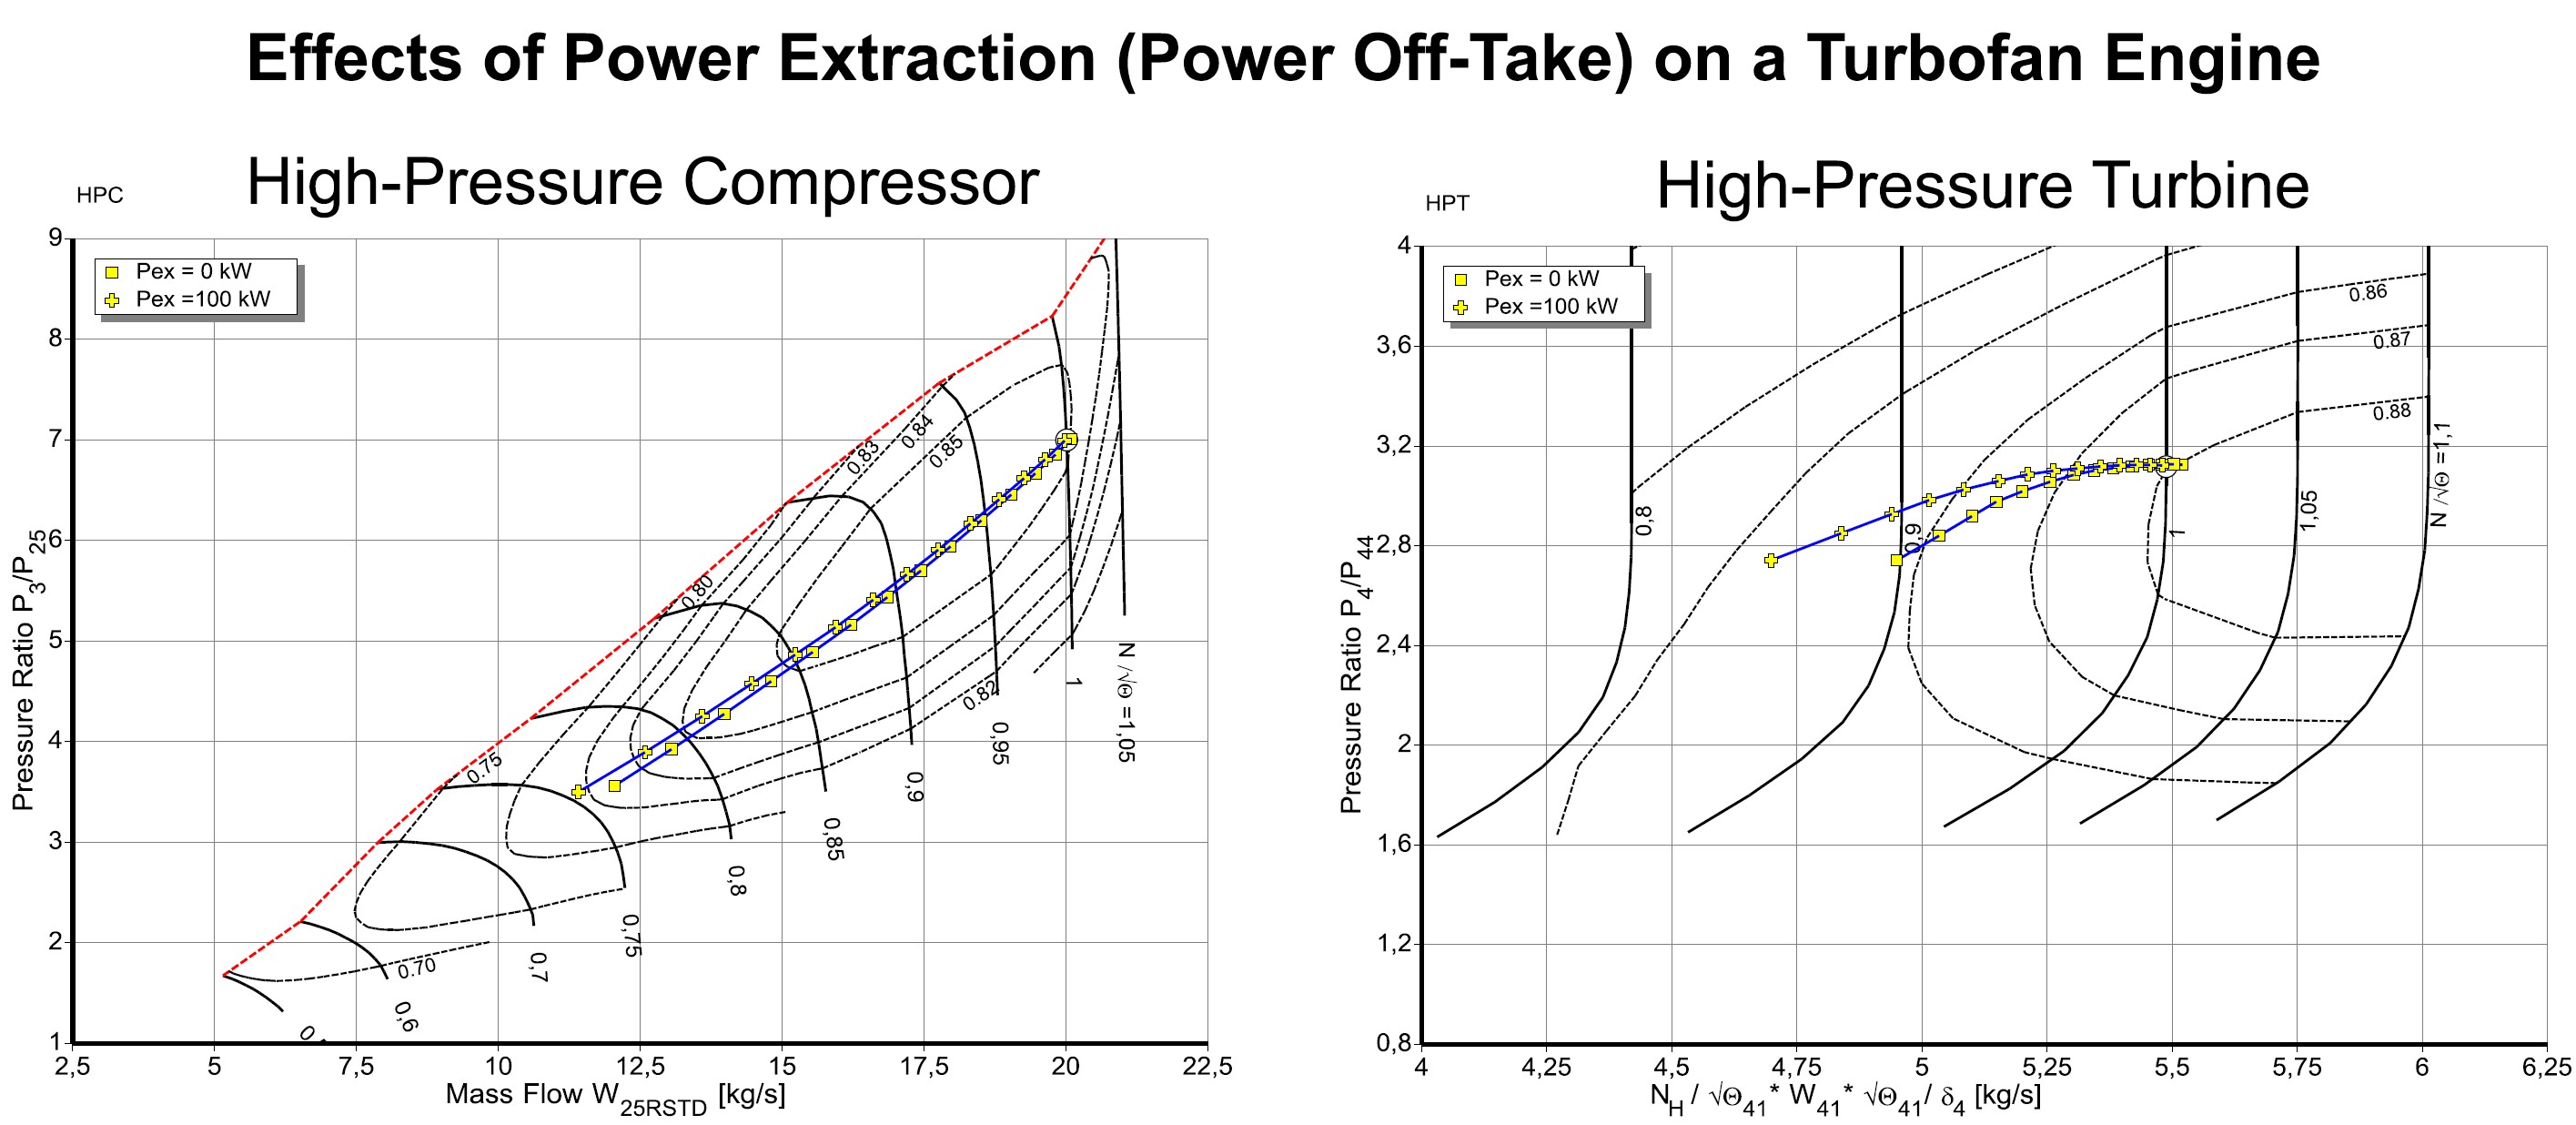 Effects of Power Extraction on Turbofan pressor and Turbine Maps